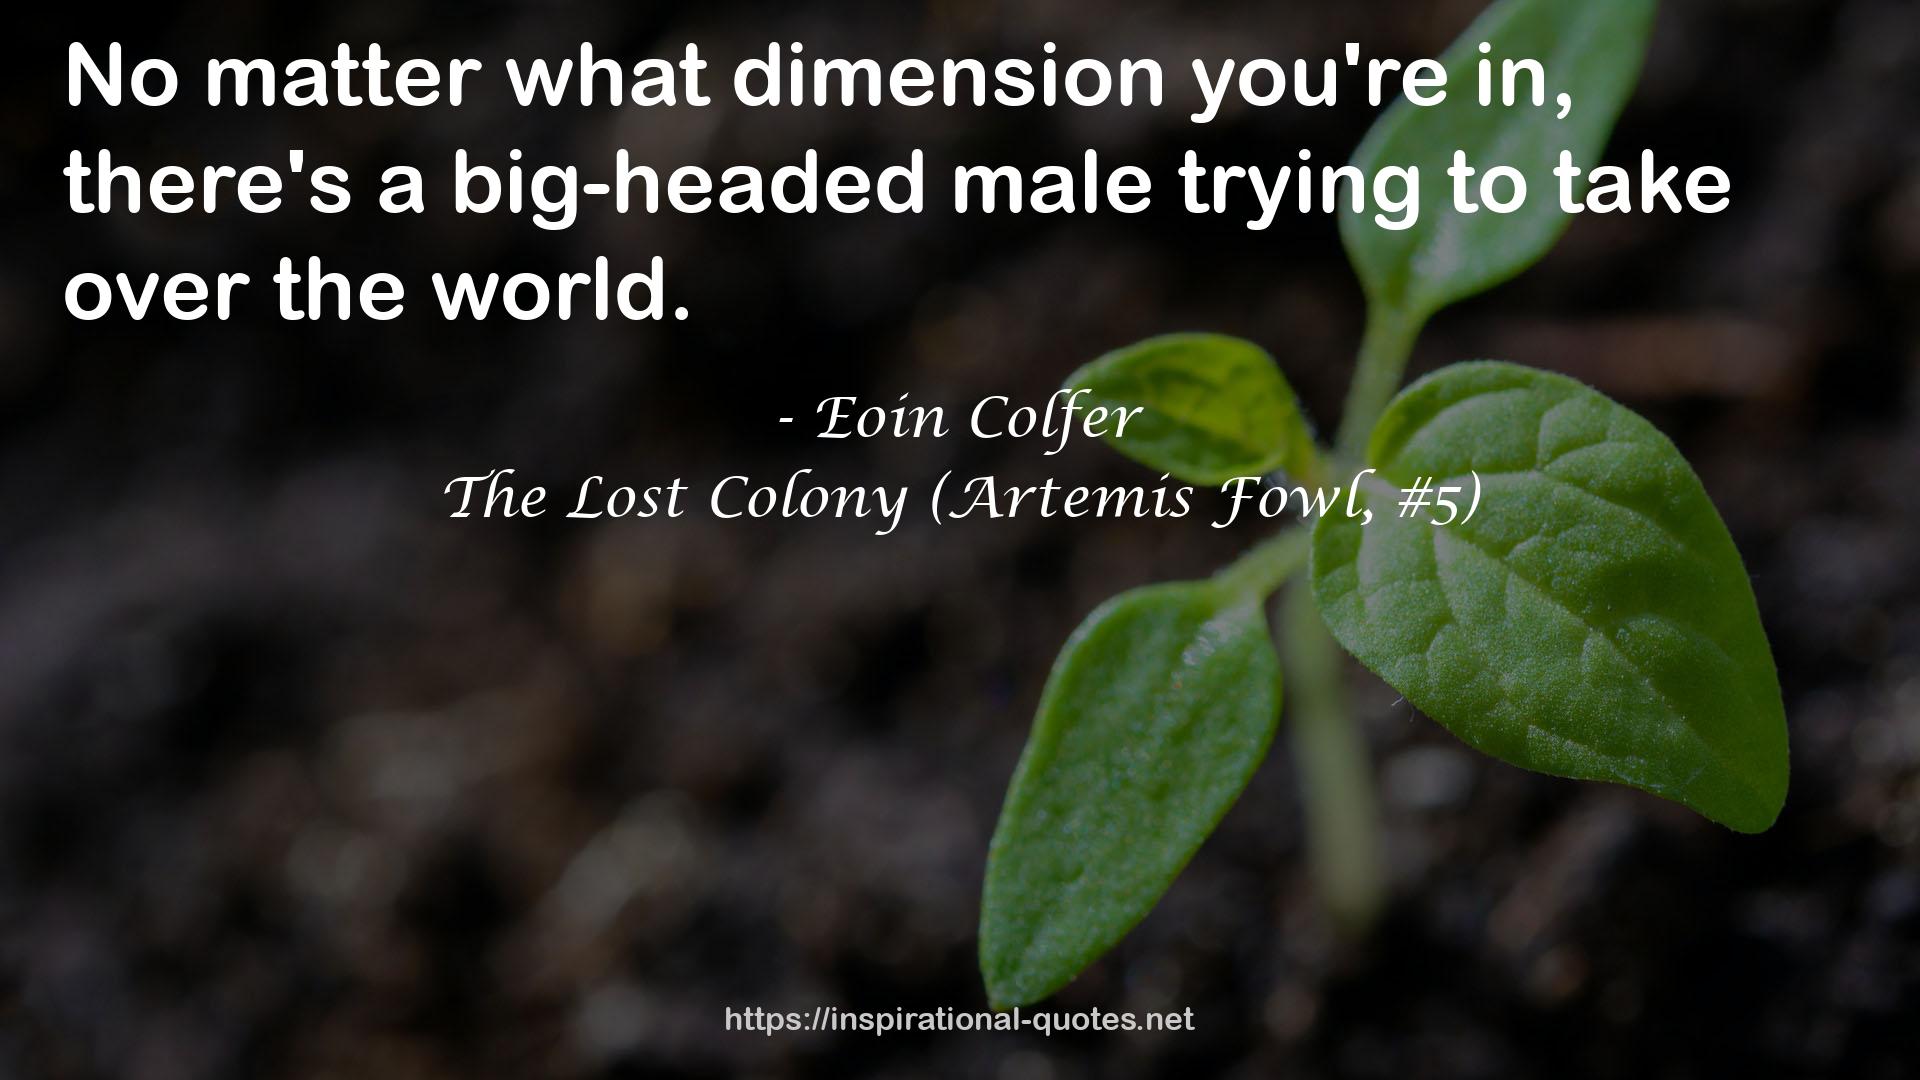 The Lost Colony (Artemis Fowl, #5) QUOTES